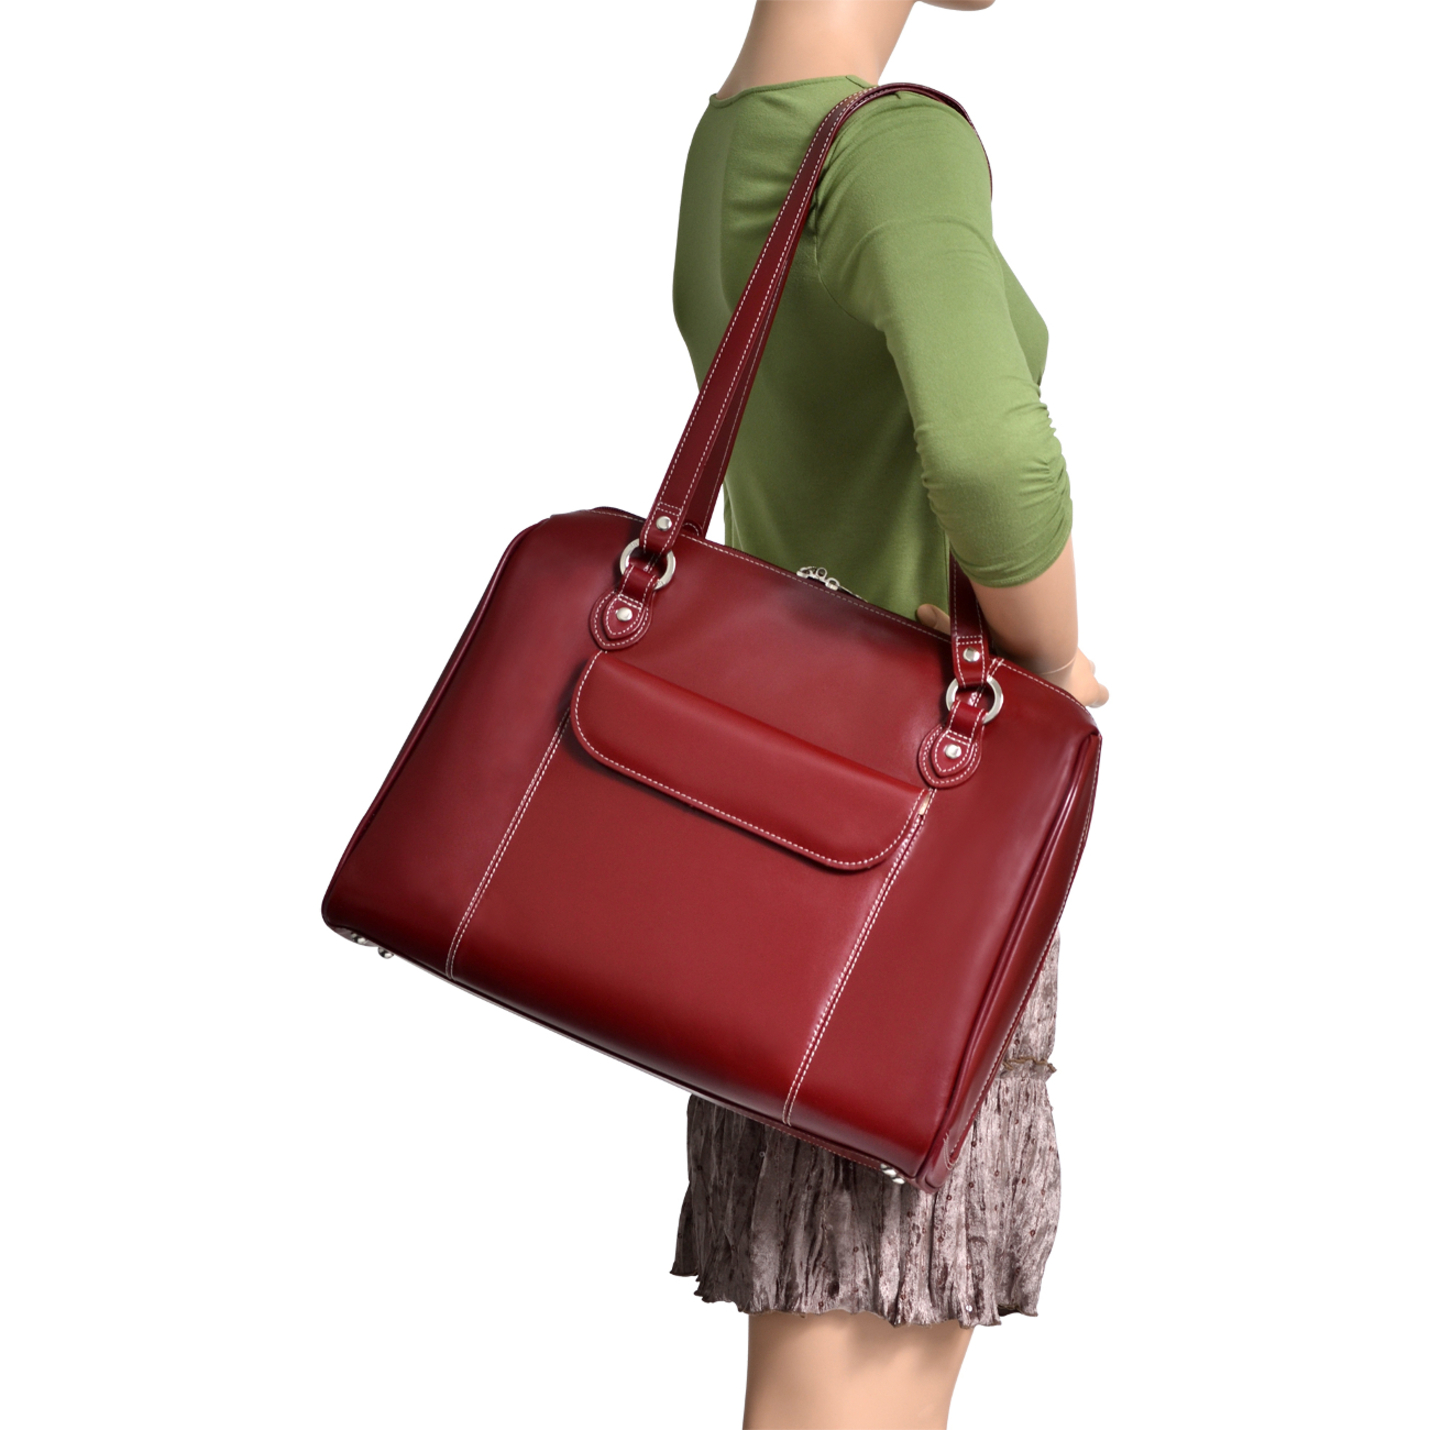 McKlein GLENVIEW, Ladies' Laptop Briefcase, Top Grain Cowhide Leather, Red (94746) - image 5 of 5